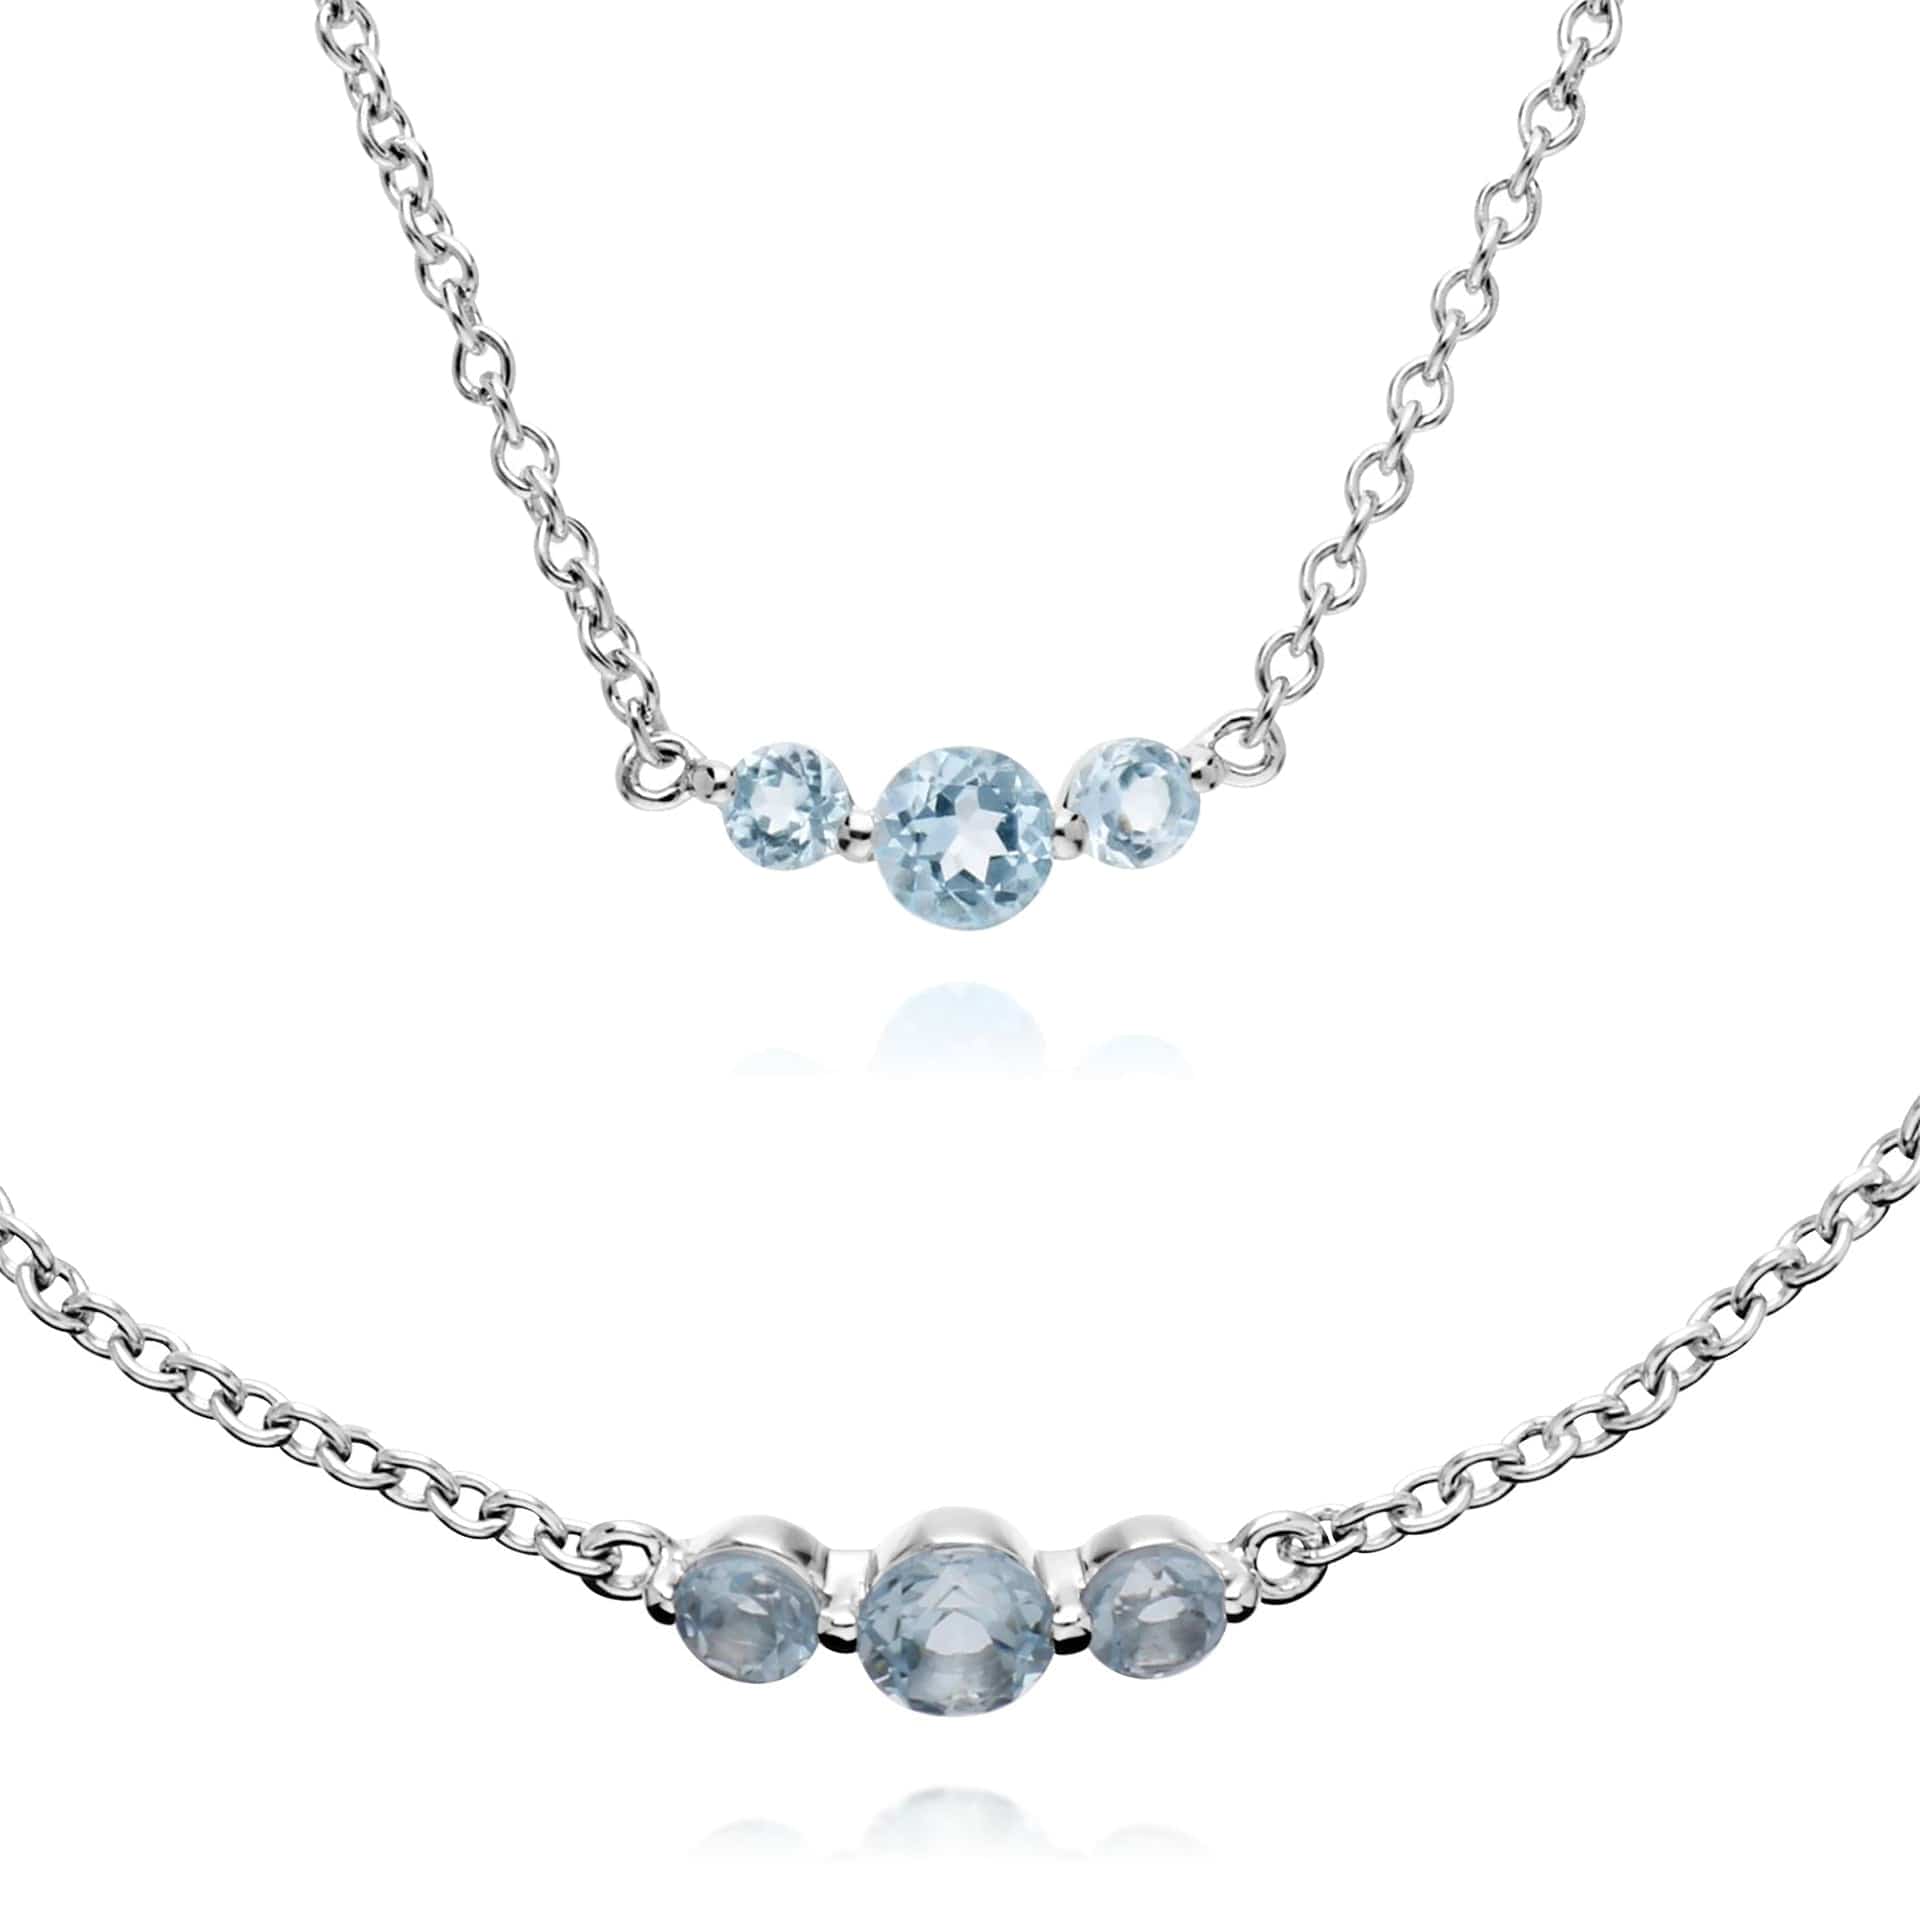 270N034201925-270L011101925 Classic Round Blue Topaz Three Stone Gradient Bracelet & Necklace Set in 925 Sterling Silver 1